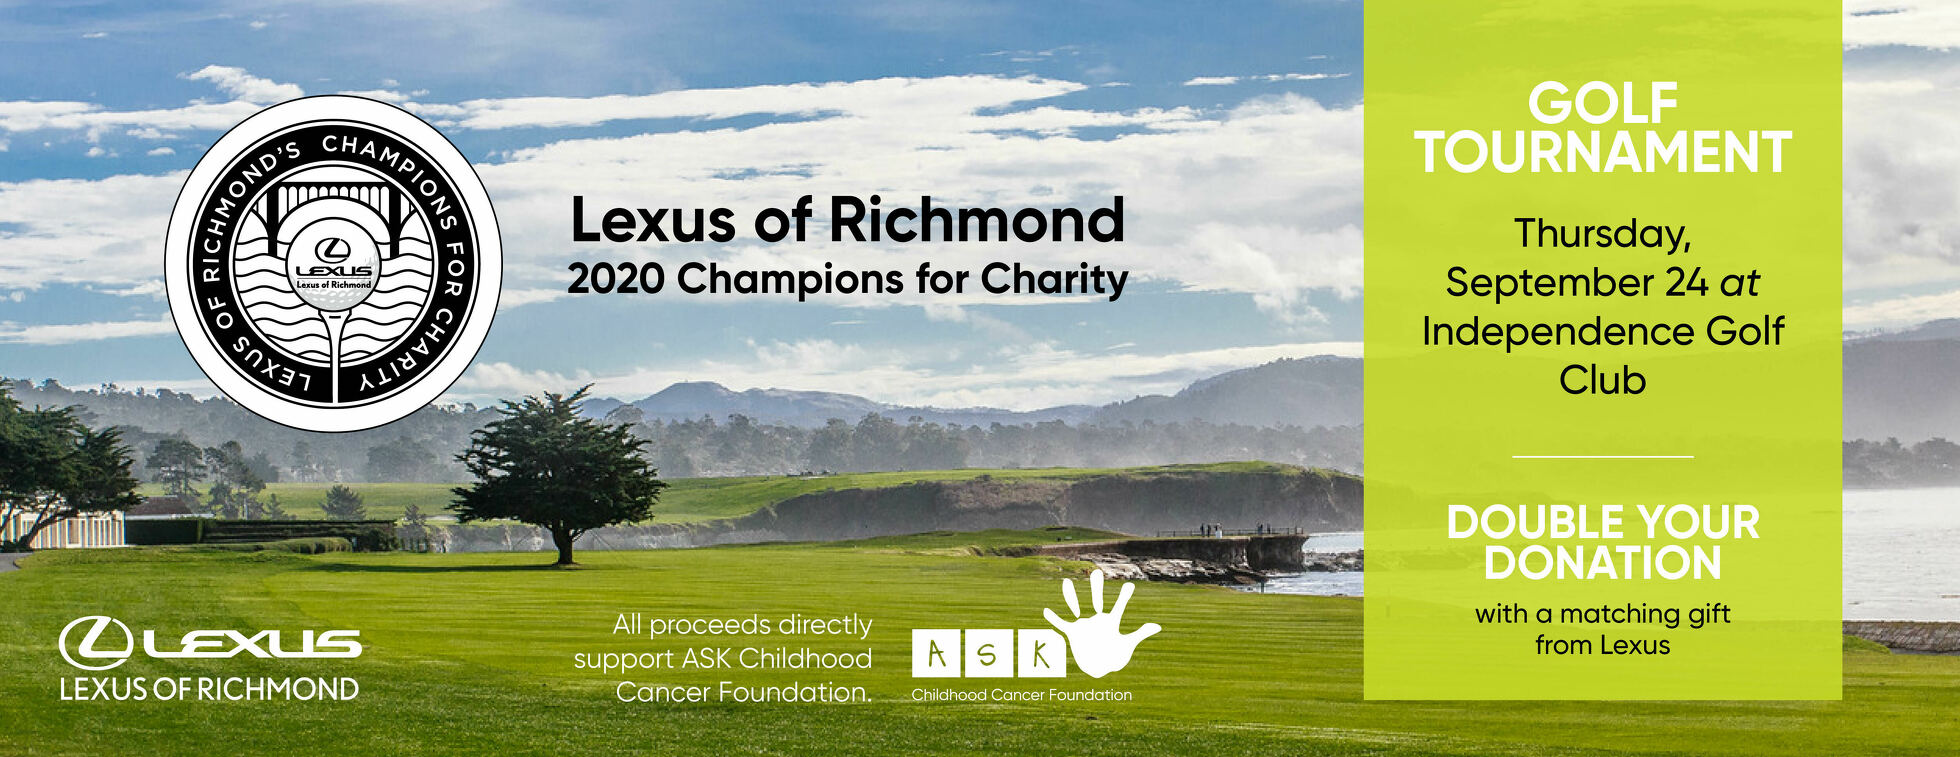 Lexus of Richmond Champions for Charity 2020